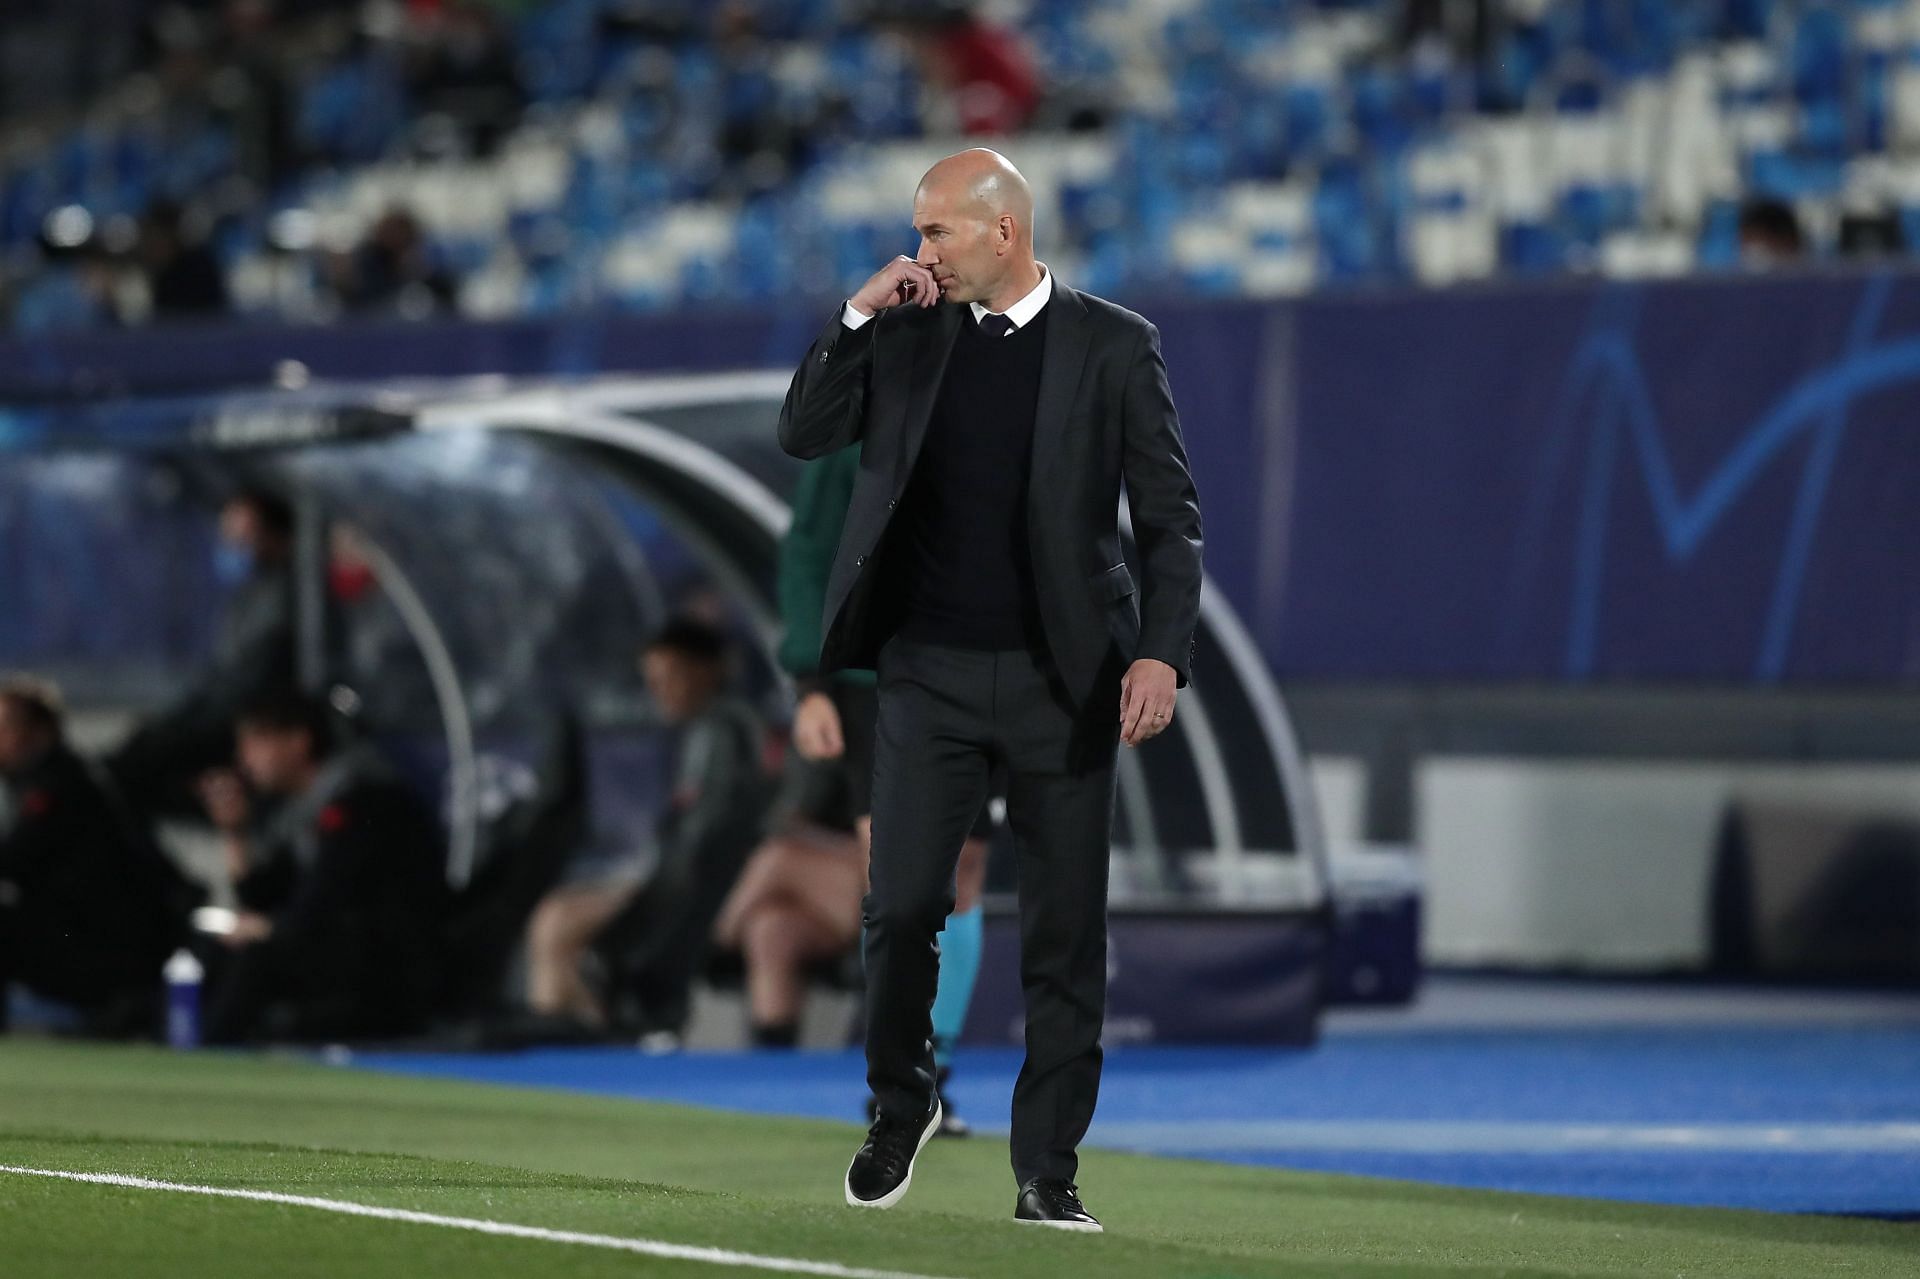 Zinedine Zidane (in pic) and Arsene Wenger could join hands in Paris.